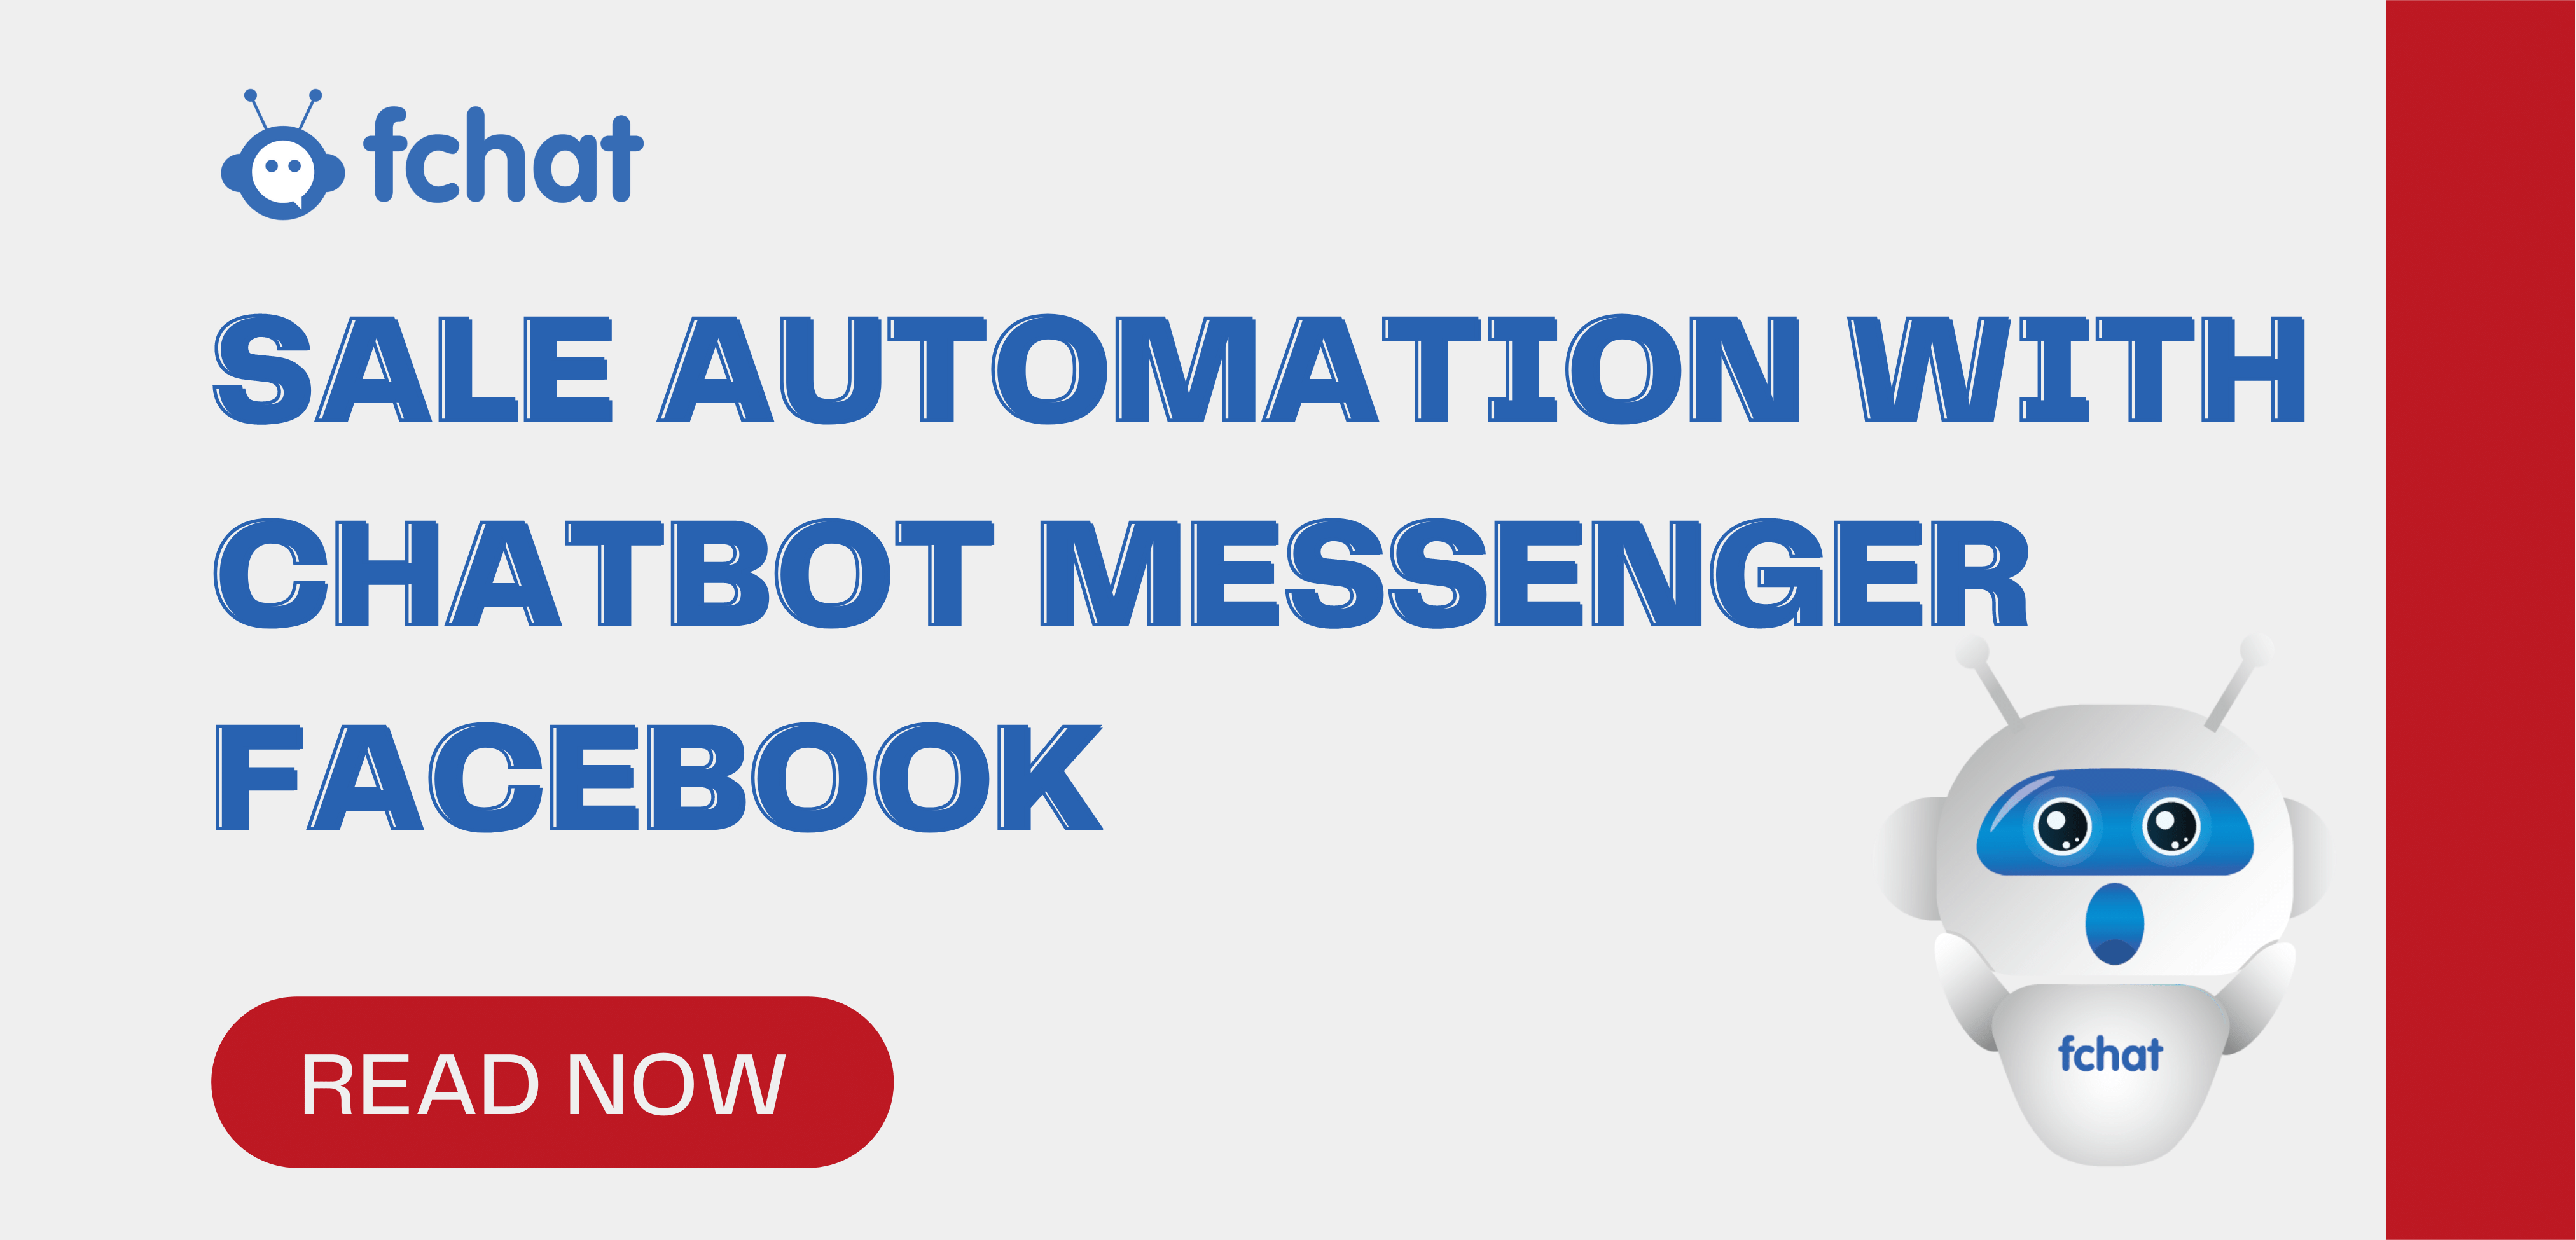 SALE AUTOMATION WITH CHATBOT MESSENGER FACEBOOK